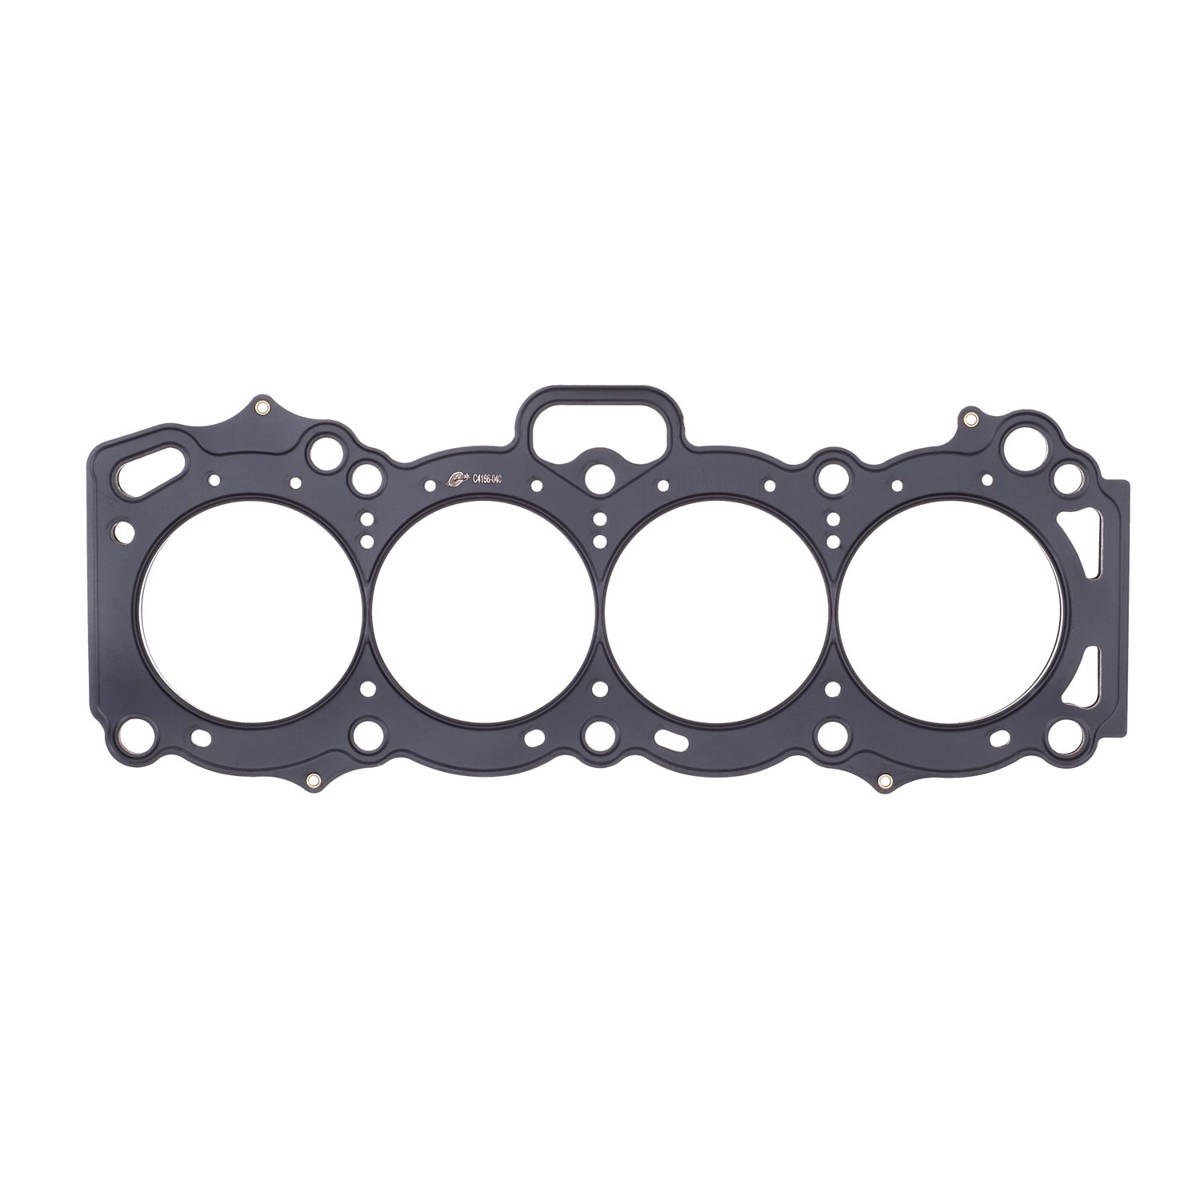 Cylinder Head Gasket Toyota 4A-GE/4A-GEZ .140" MLS , 83mm Bore, 16-Valve Cometic C4166-140